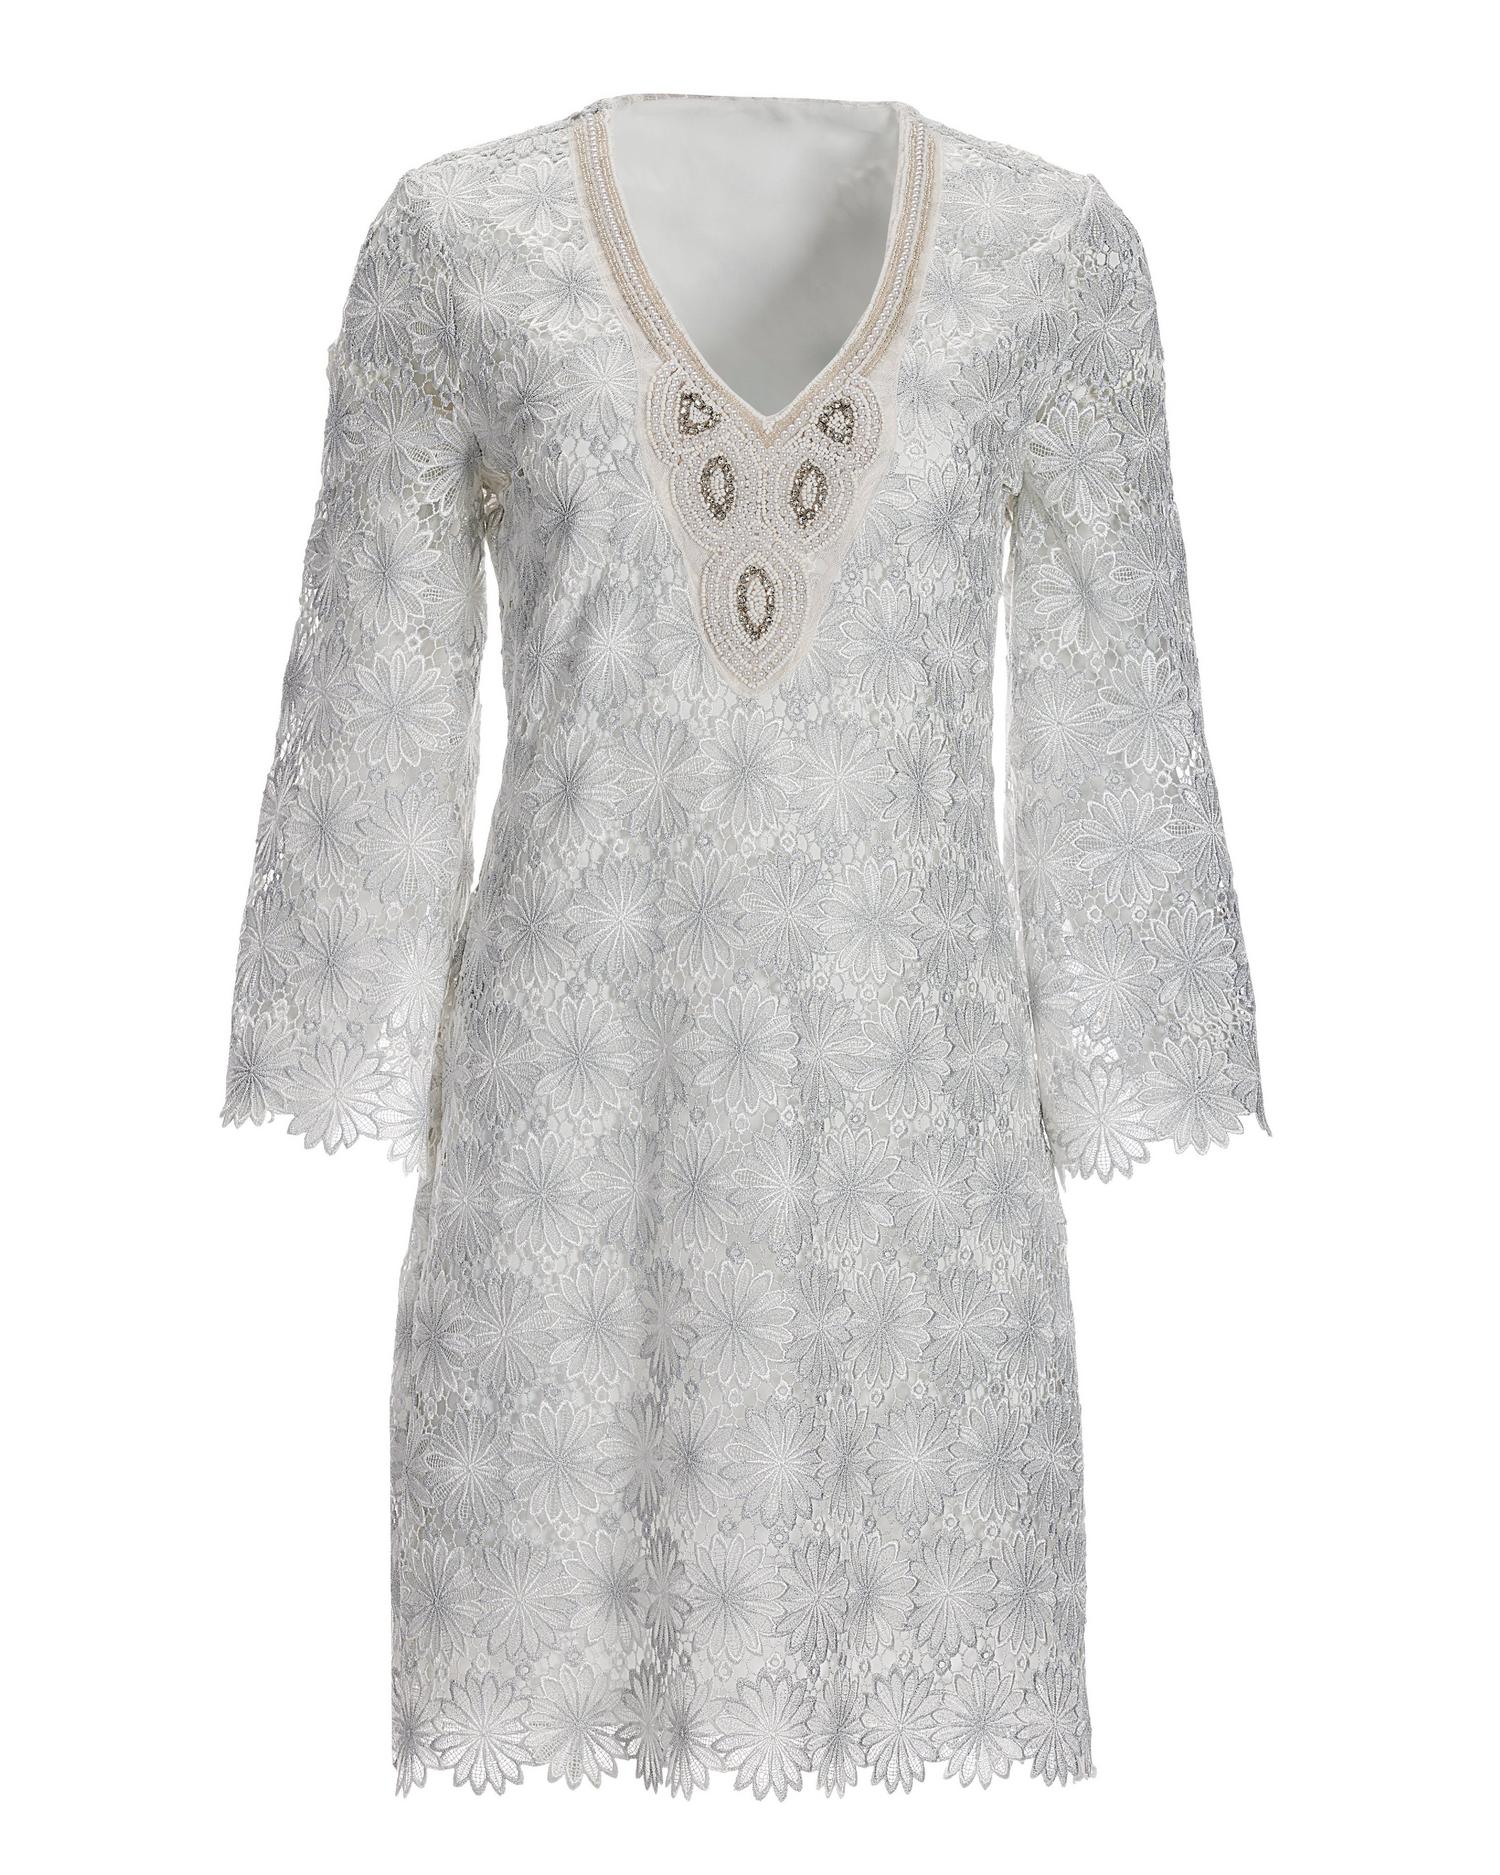 Embellished Metallic Floral Lace Tunic Dress - White/Silver